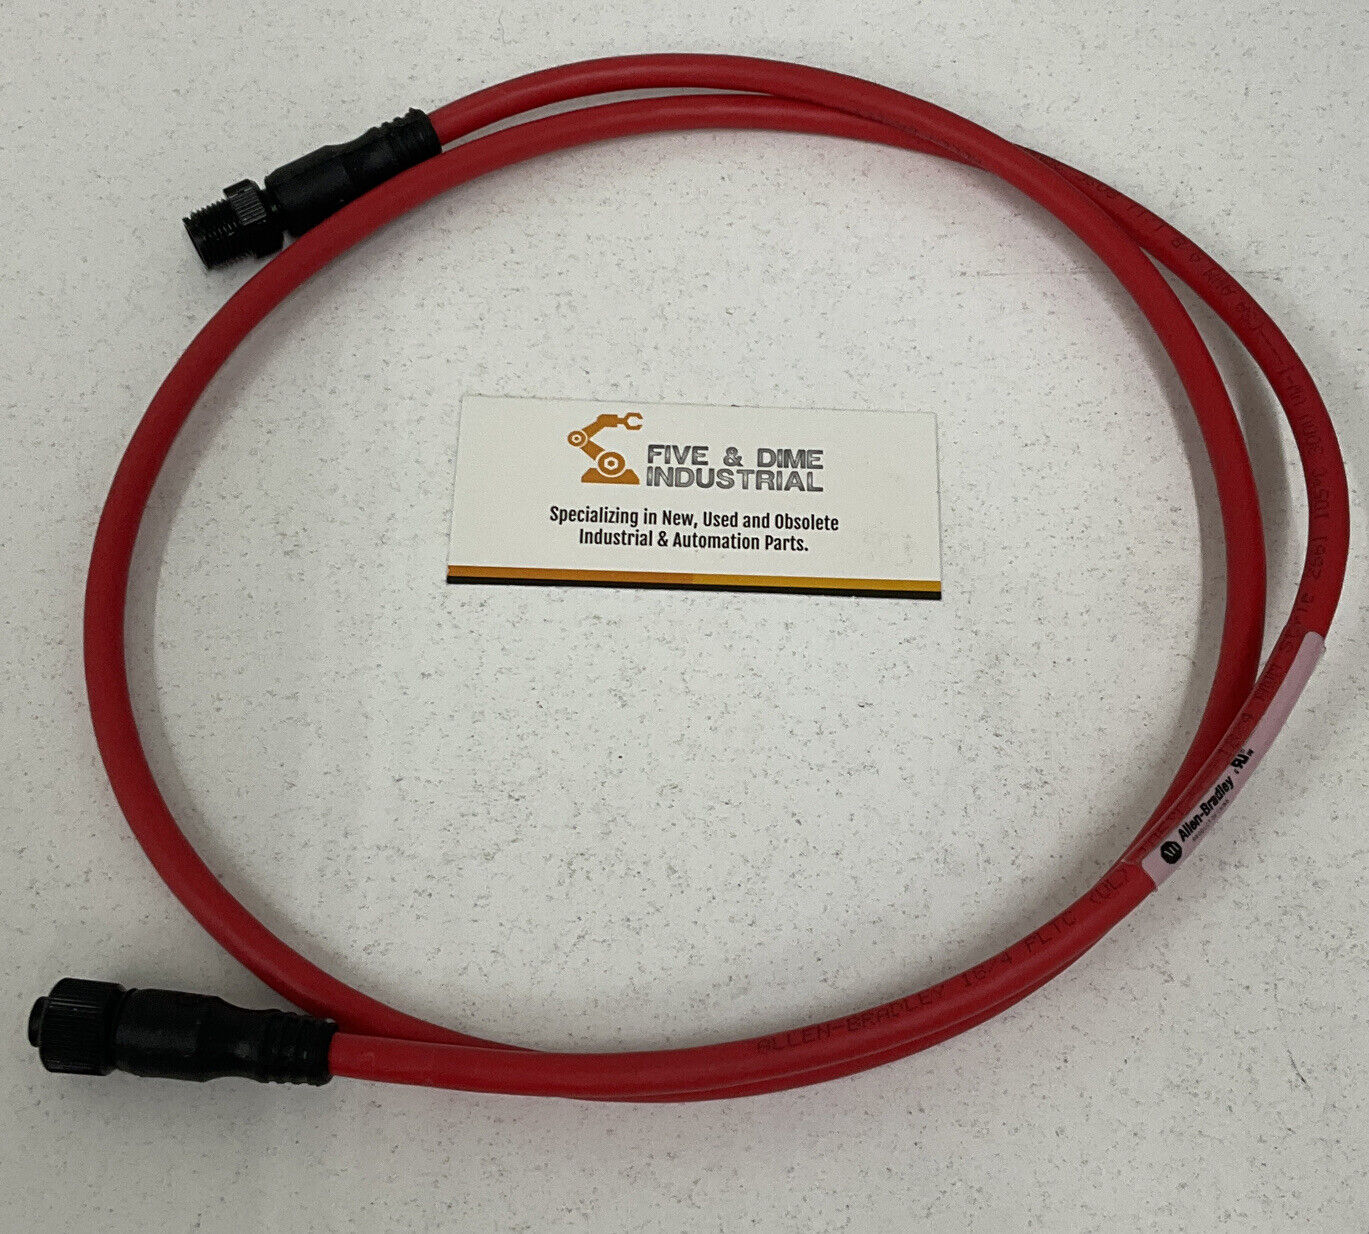 Allen Bradley 889D-F4NEDM-1 New 4-Pin Straight DC Micro Cable 1 Meter (GR219)